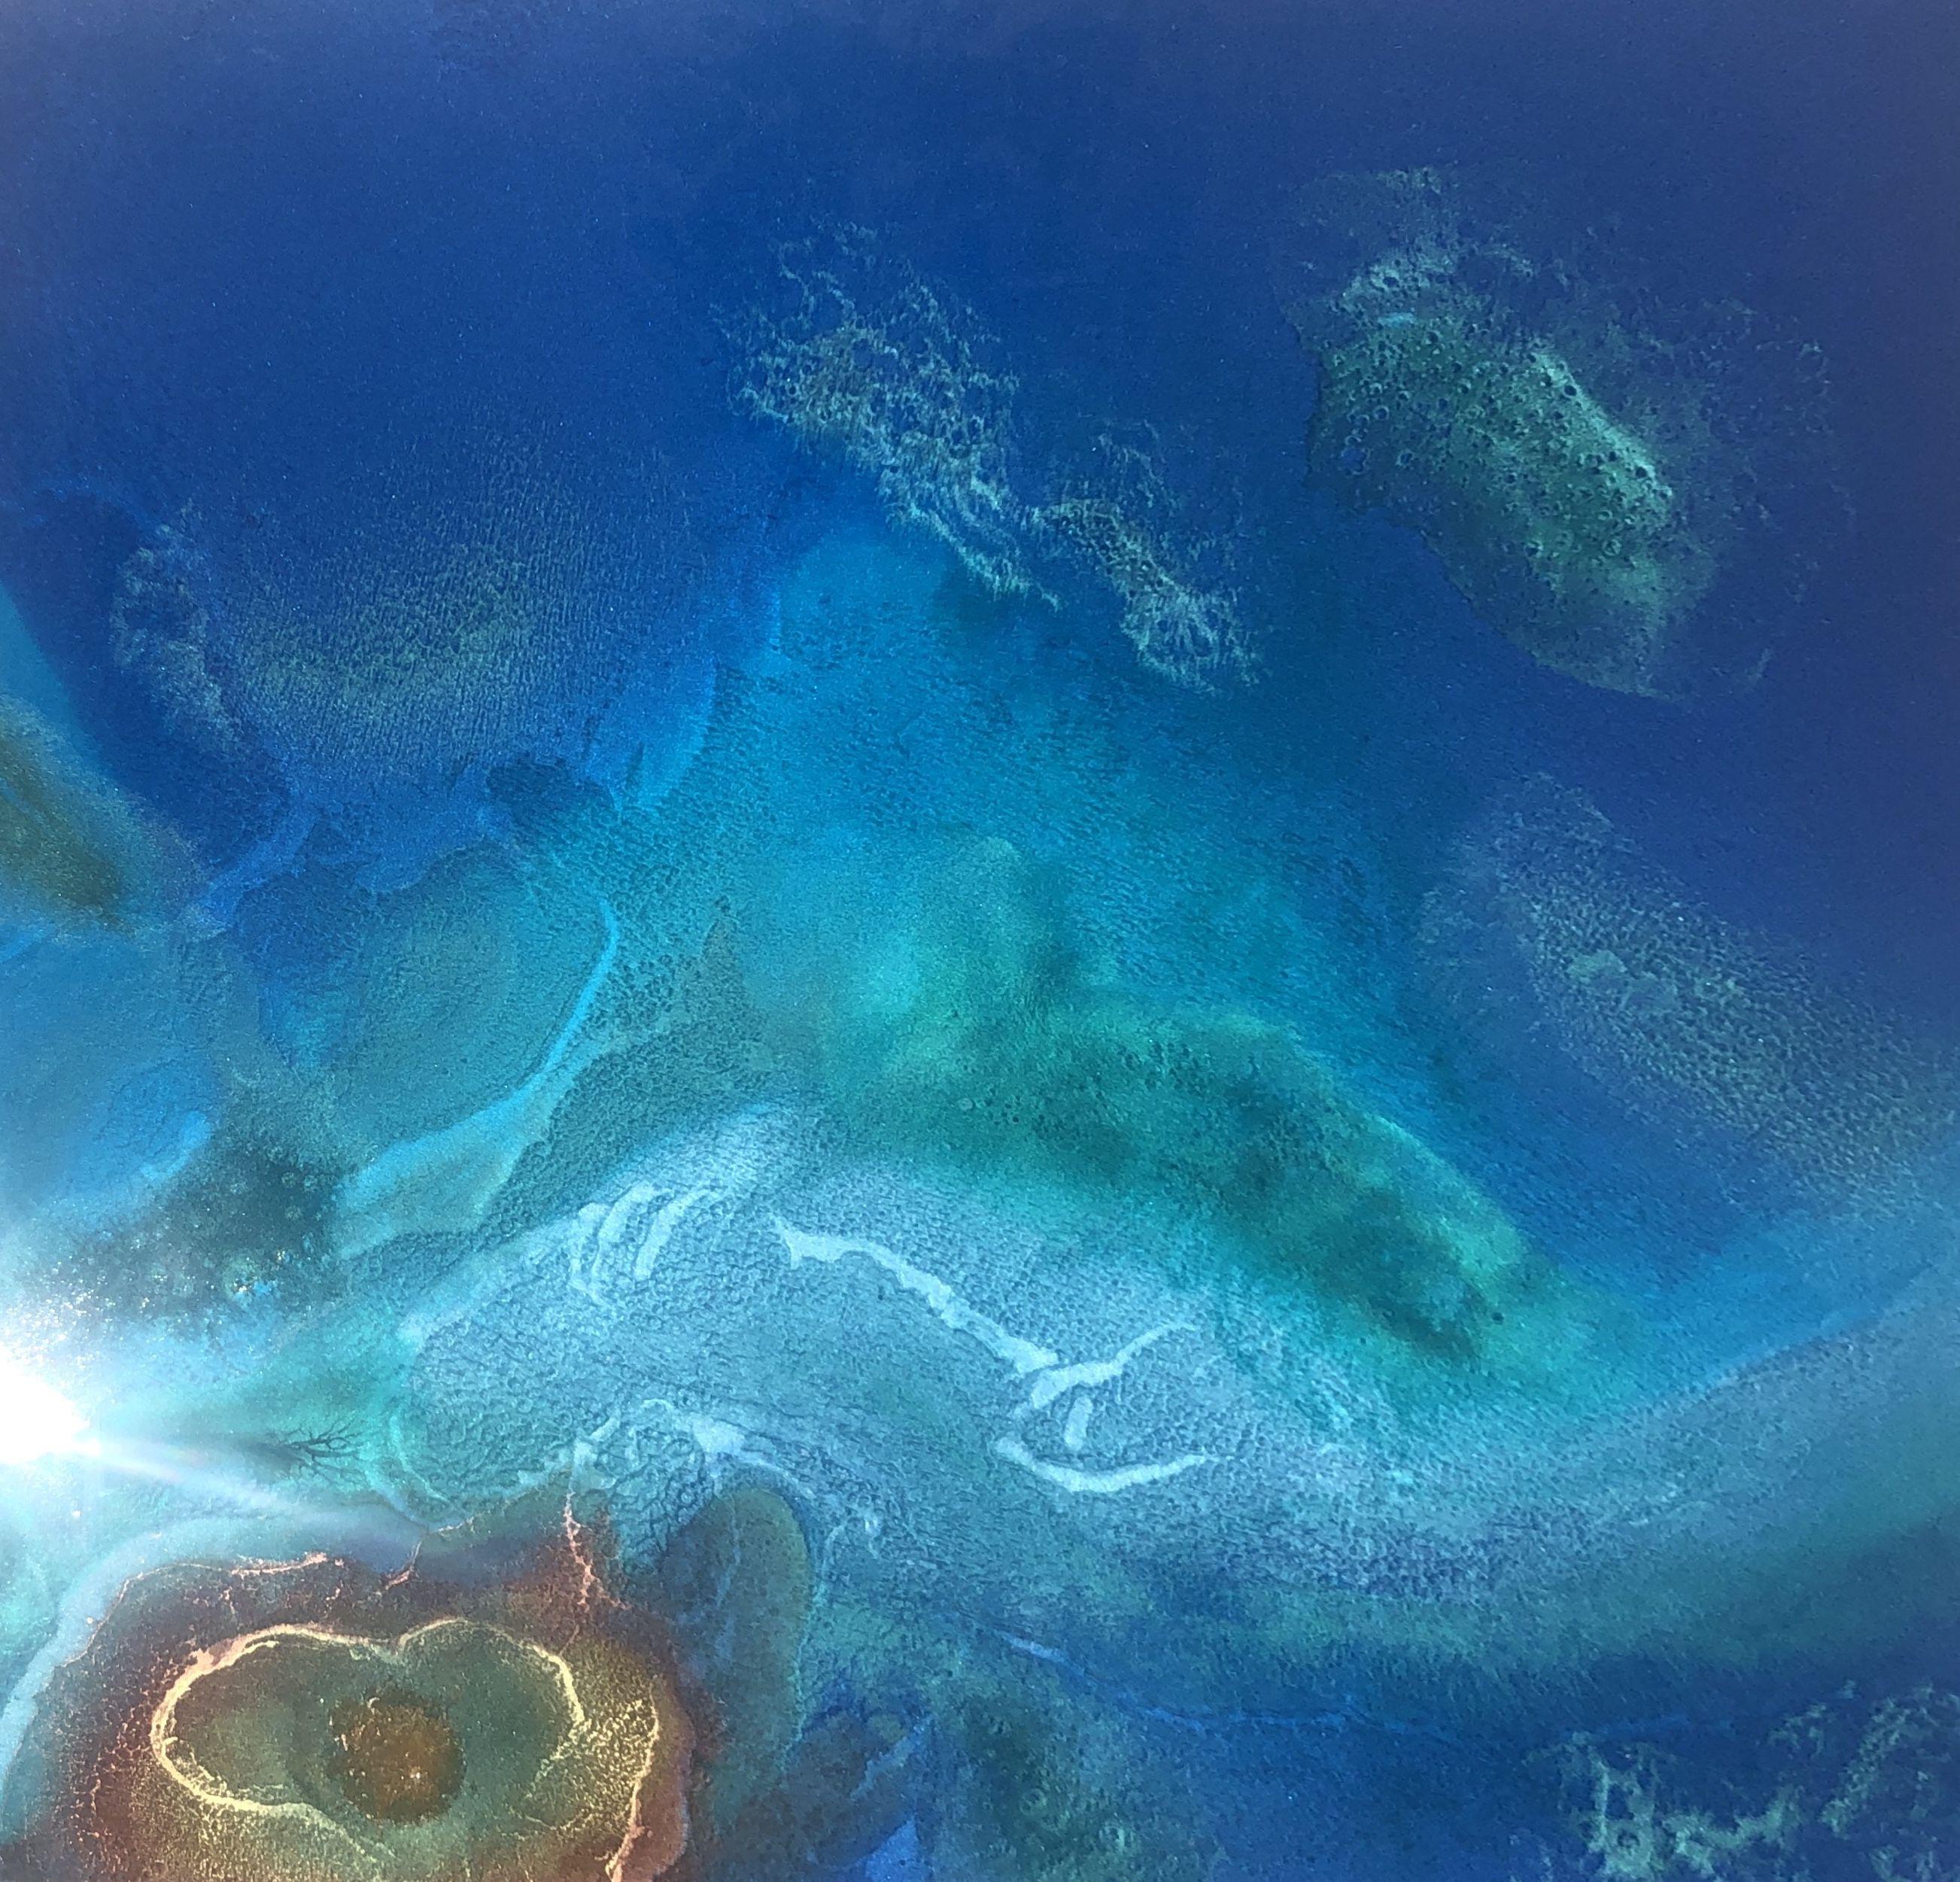 Ocean inspired painting, painted in several layers with tinted resin, tridimensional effects, absolutely unique and impossible to recreate. Painting Details Mixed Media on wood panel 30" x 30" x 1.5" Different shades of blue, green, turquoise, teal,